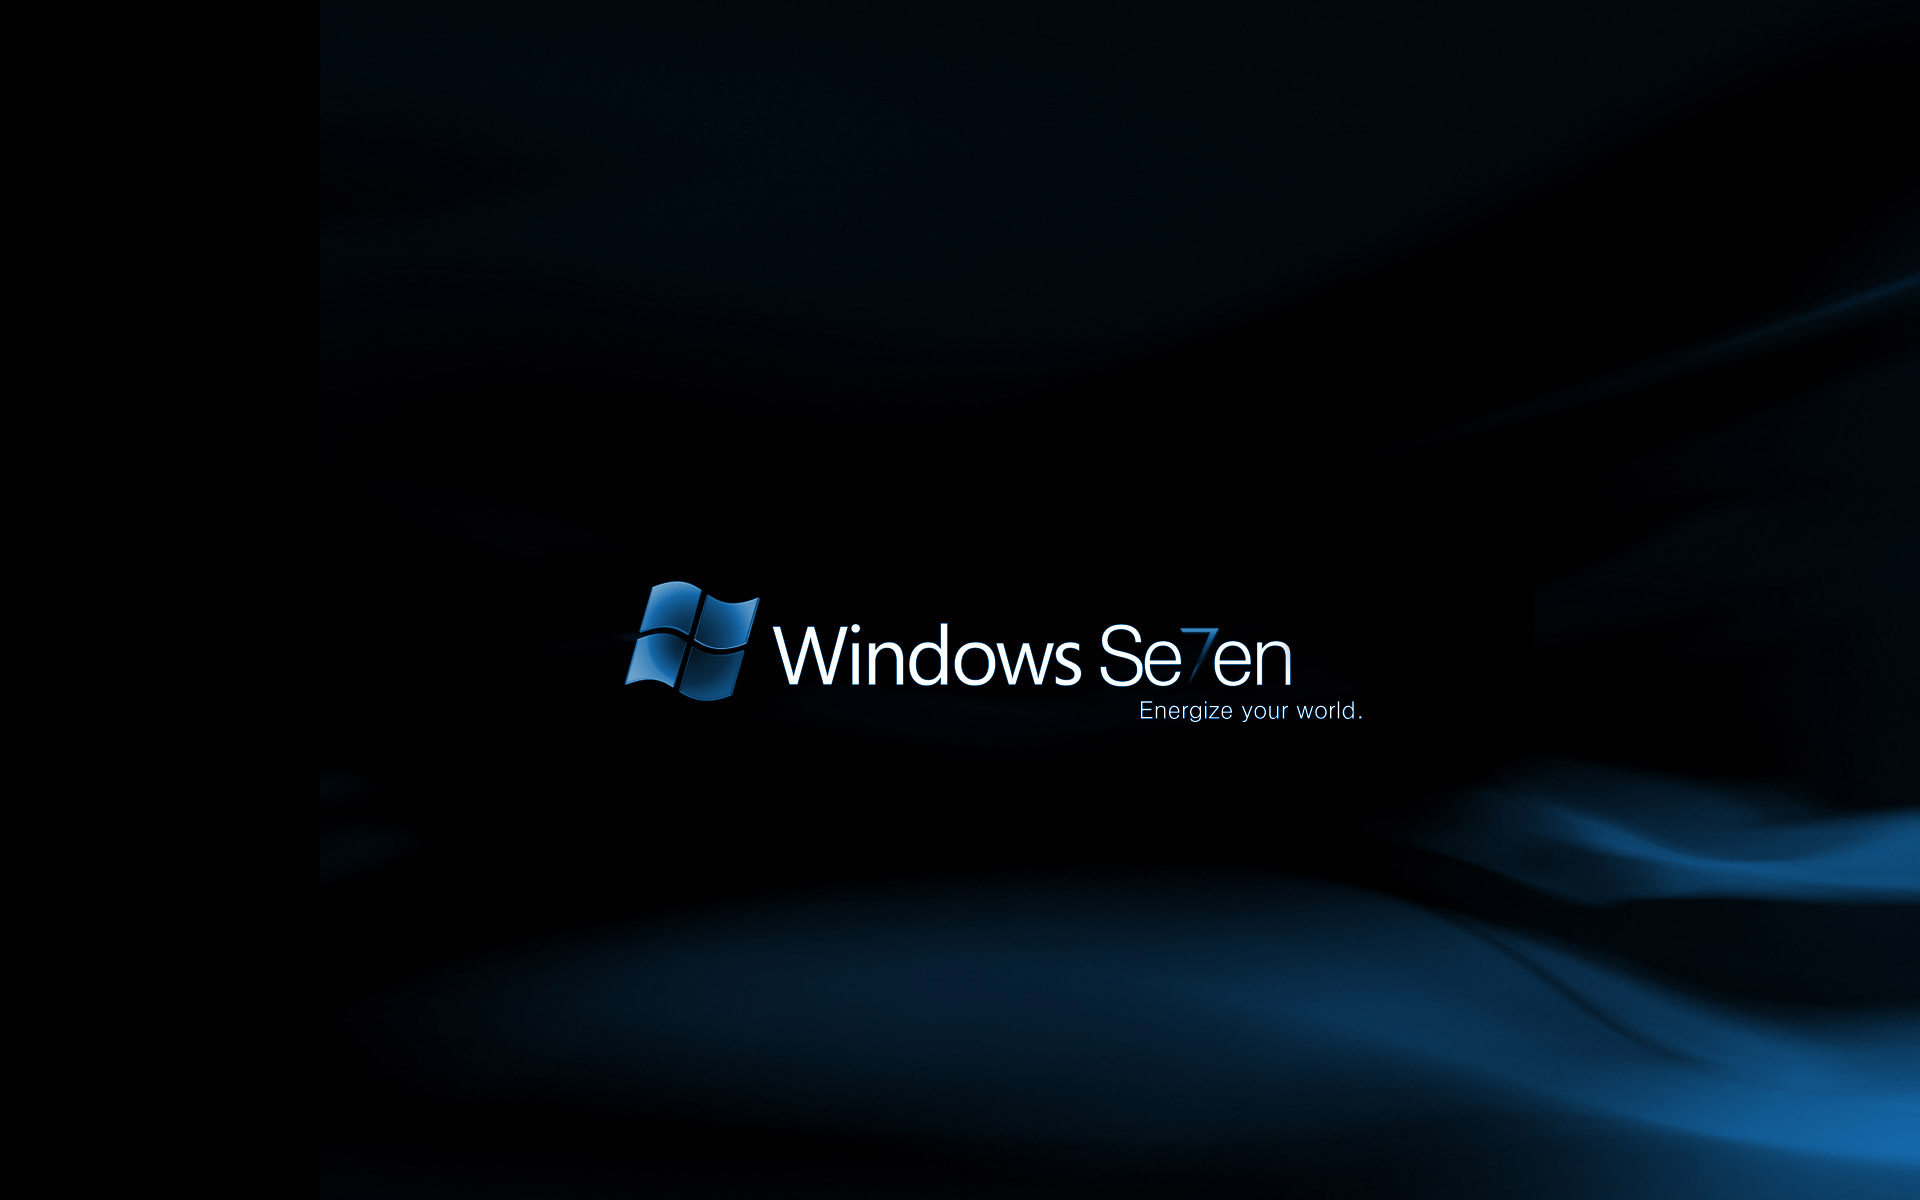 Windows 7 Energize Your World Wallpapers HD Wallpapers